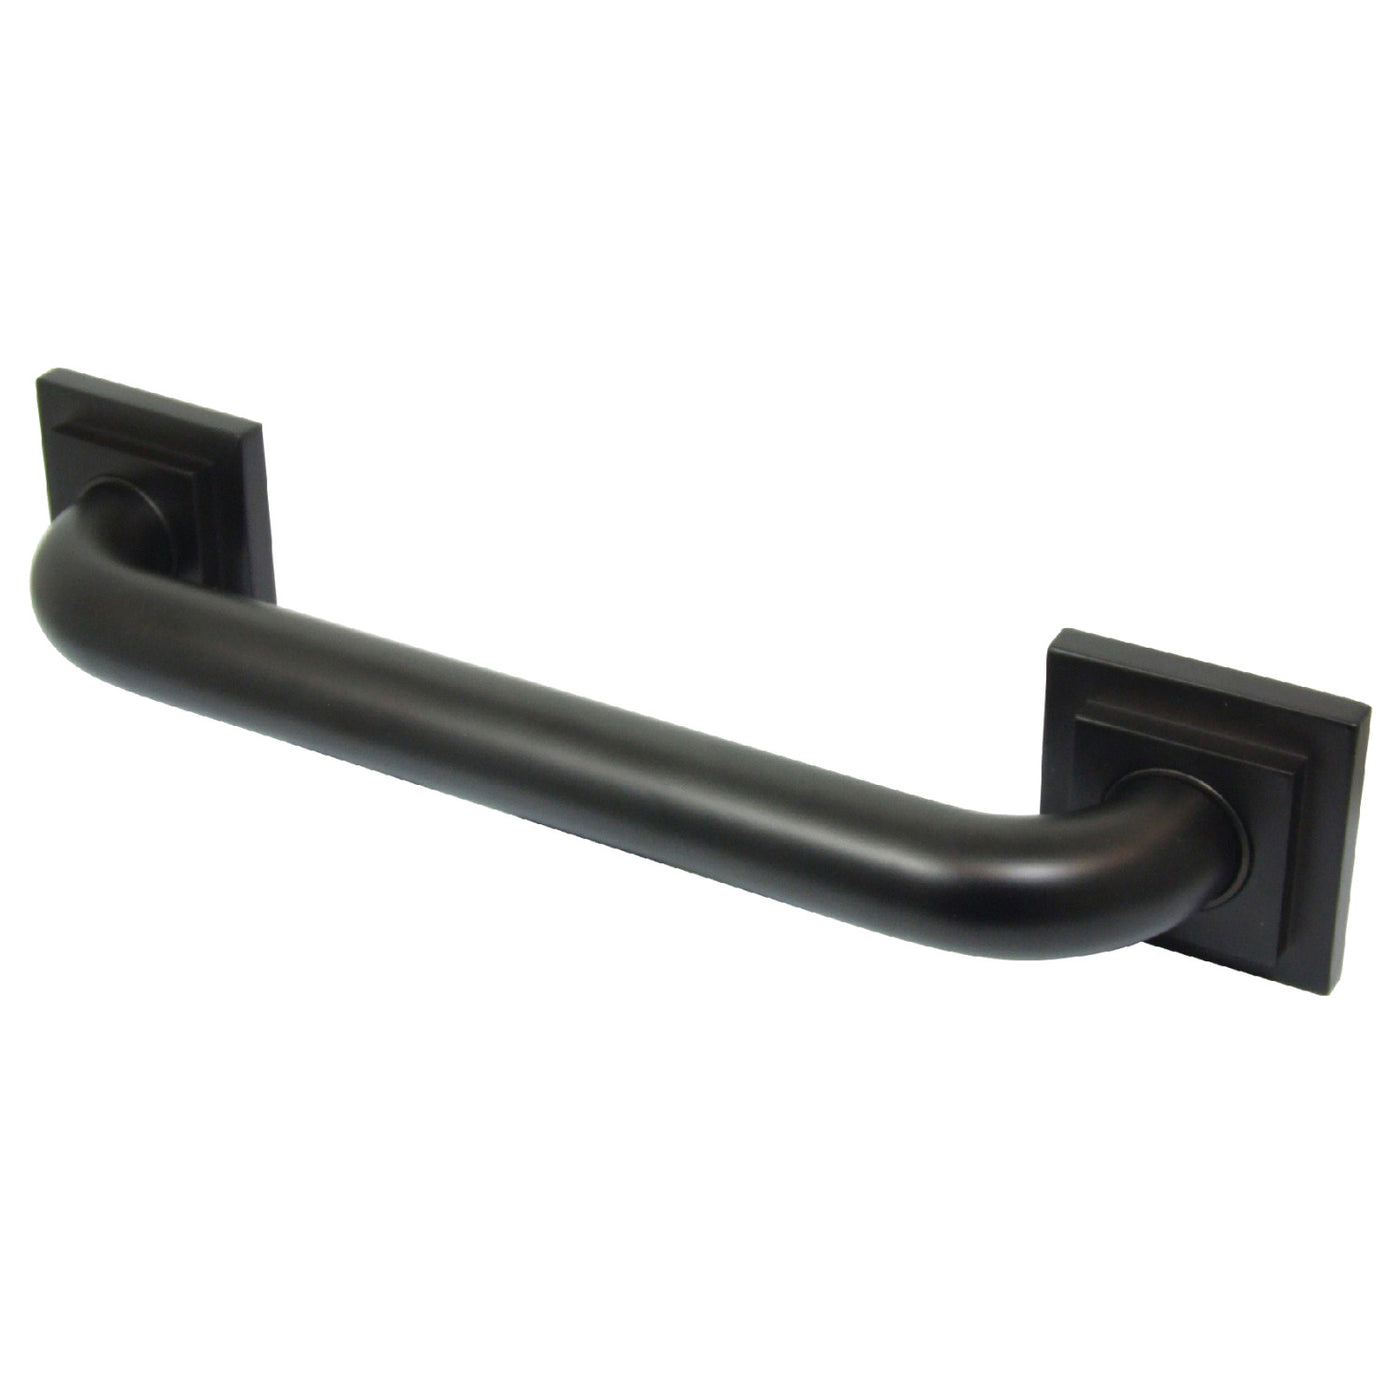 Elements of Design EDR614125 12-Inch x 1-1/4-Inch O.D Grab Bar, Oil Rubbed Bronze